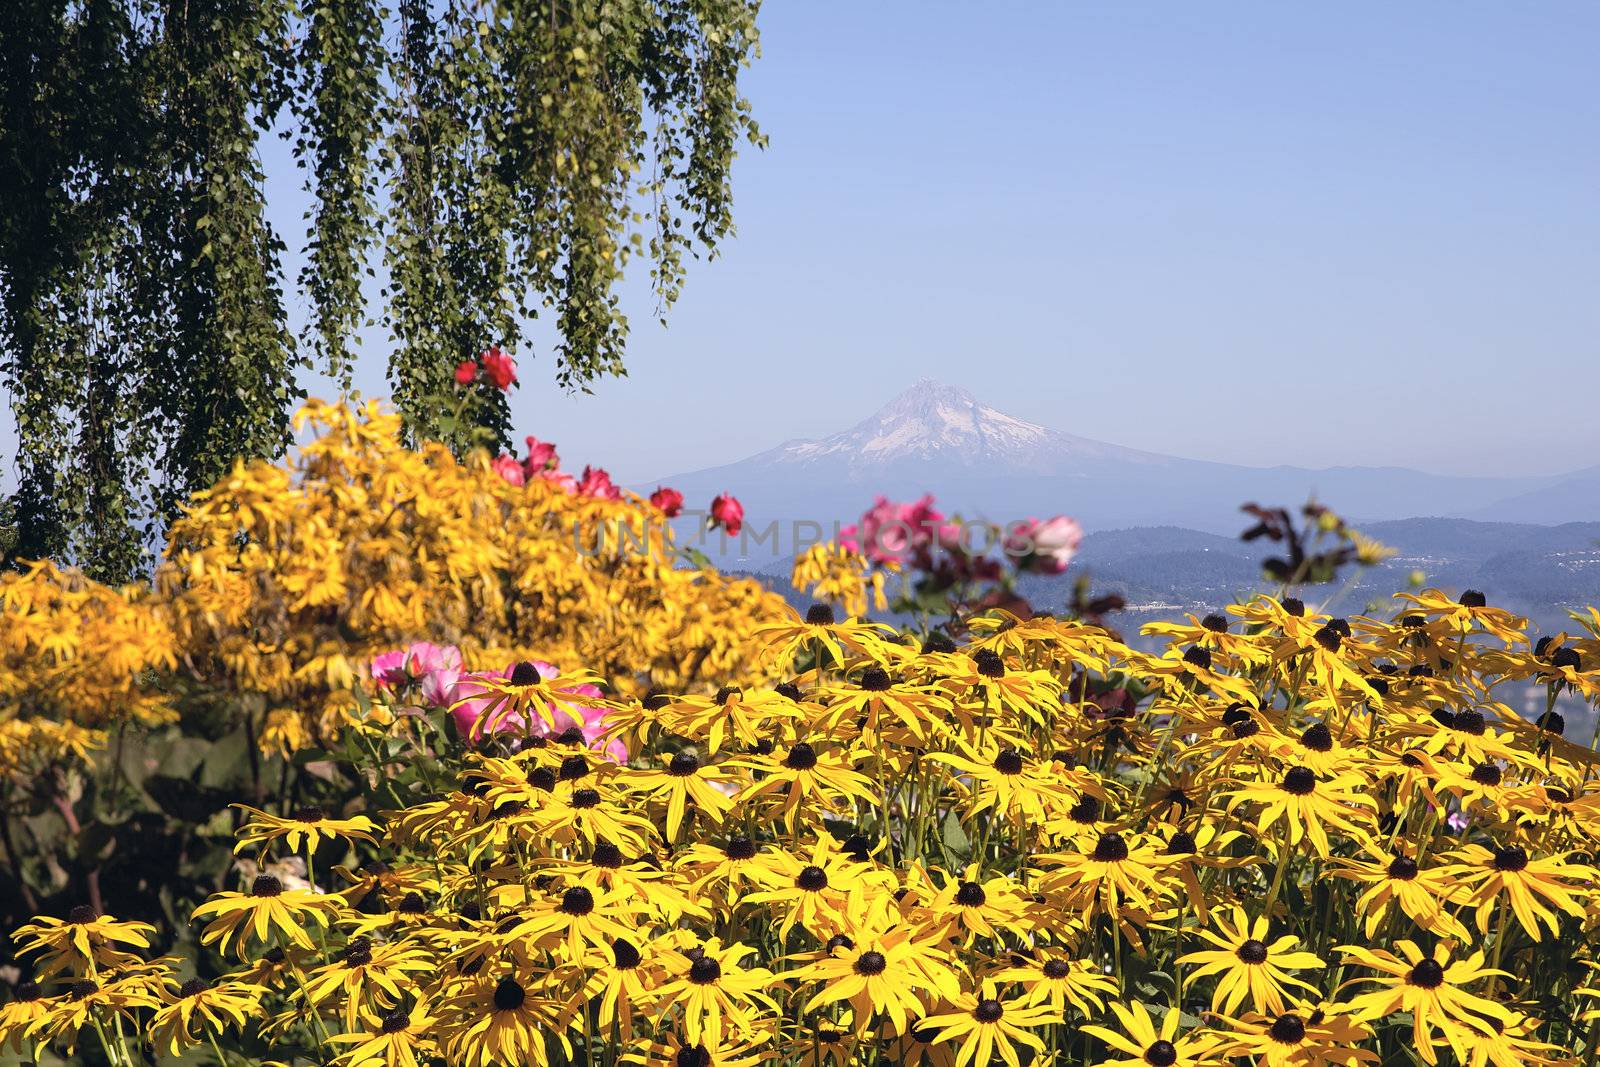 Mount Hood View in Oregon with Flowers and Tree in the Park